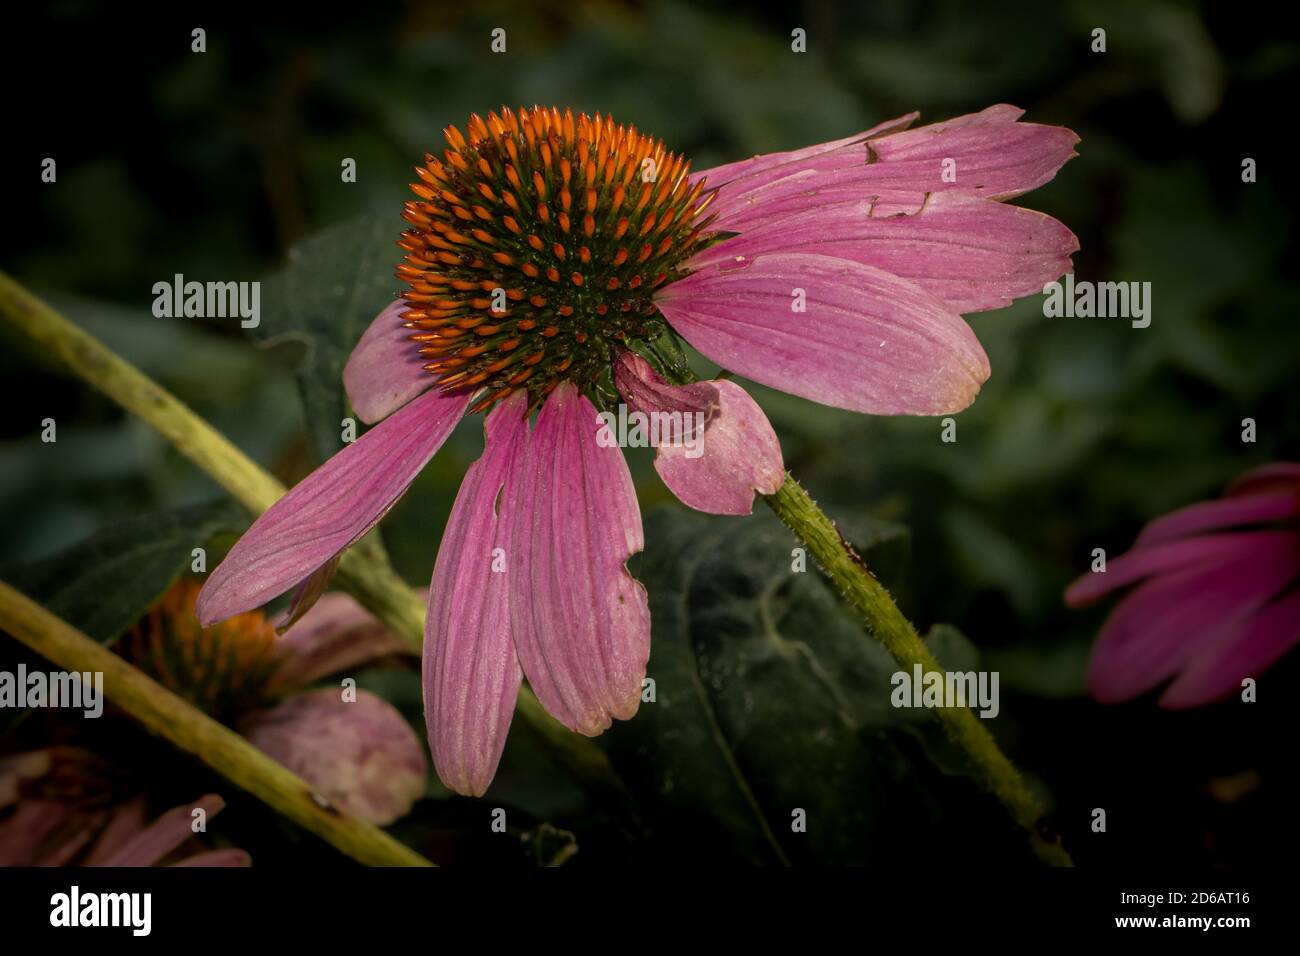 close up view of echinacea angustifolia on natural background Stock Photo